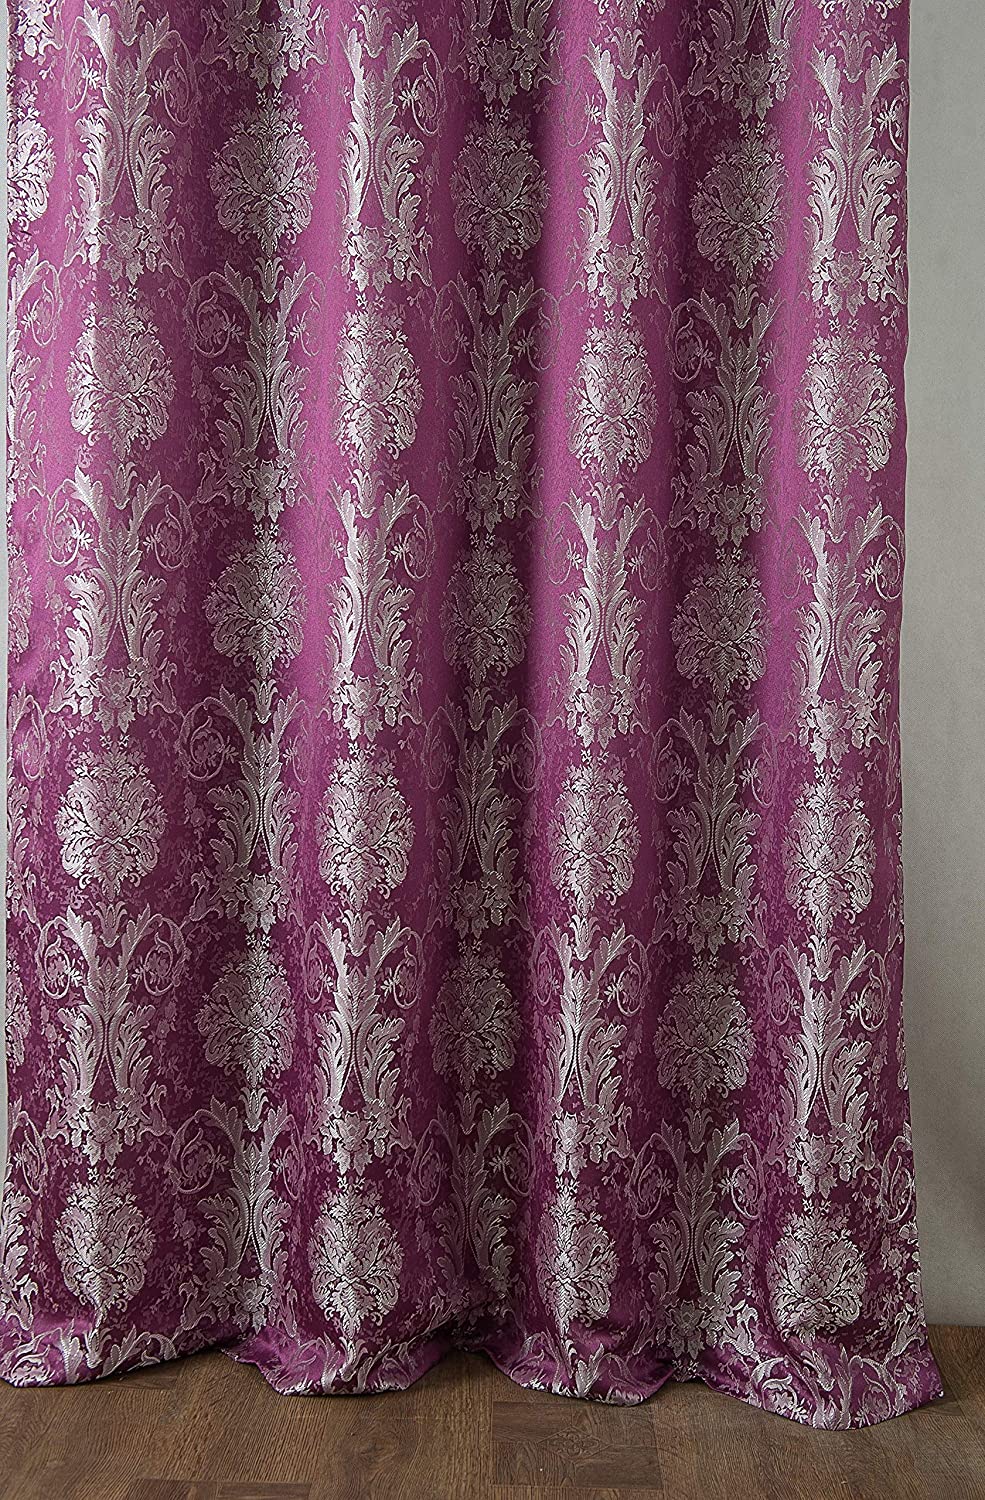 Gloria Floral/Damask Textured Jacquard 54 x 84 in. Single Rod Pocket Curtain Panel w/Attached 18 in. Valance - Linen Universe Co.